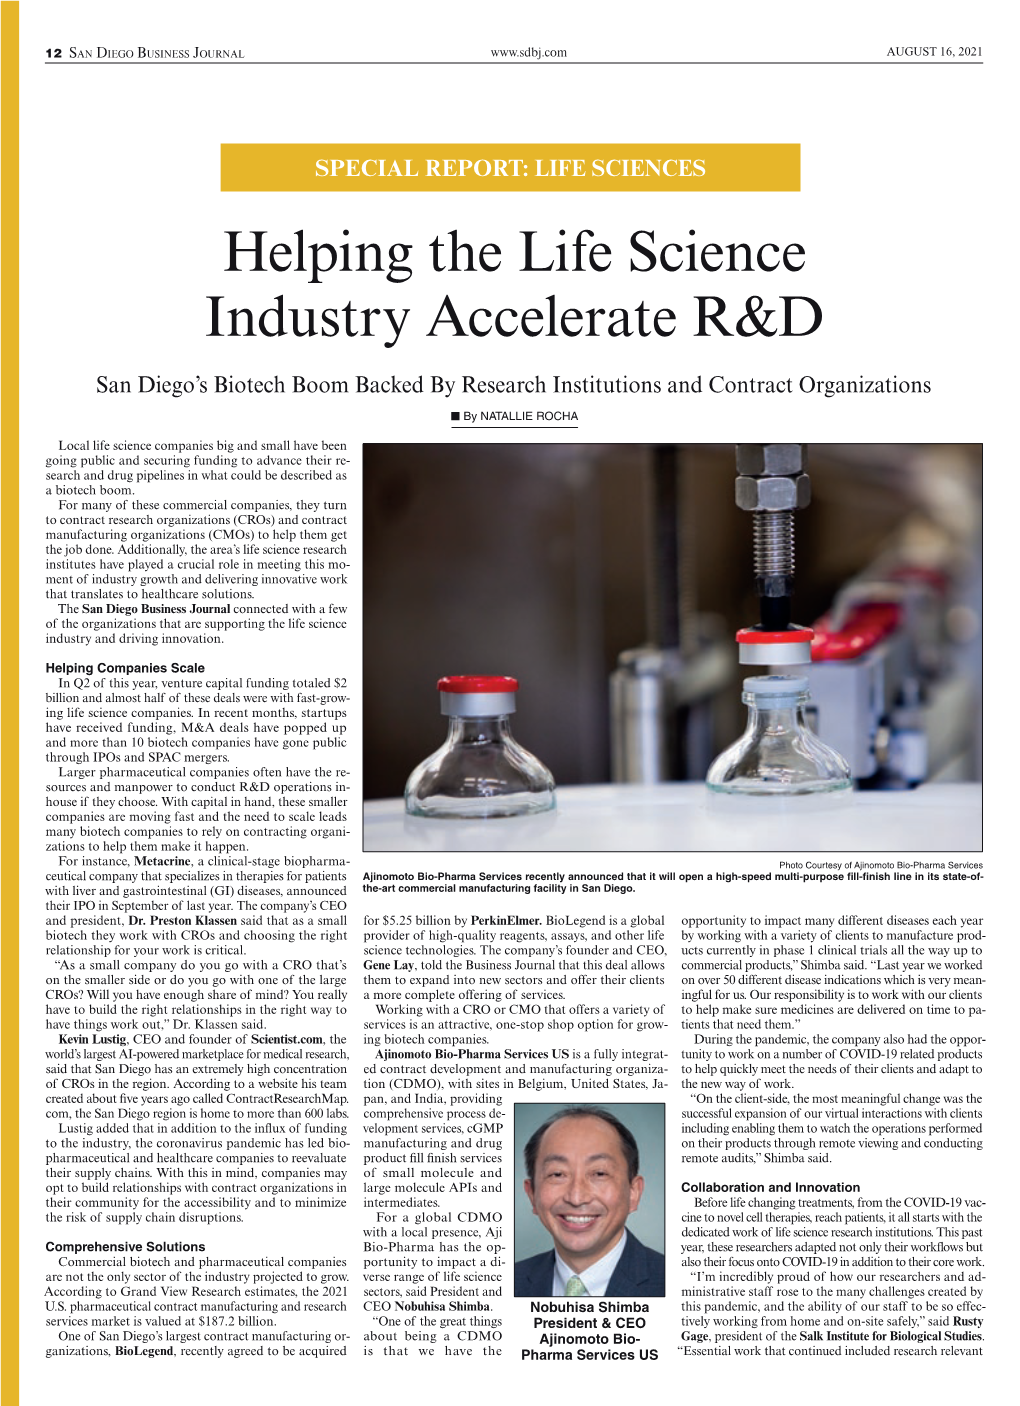 Helping the Life Science Industry Accelerate R&D